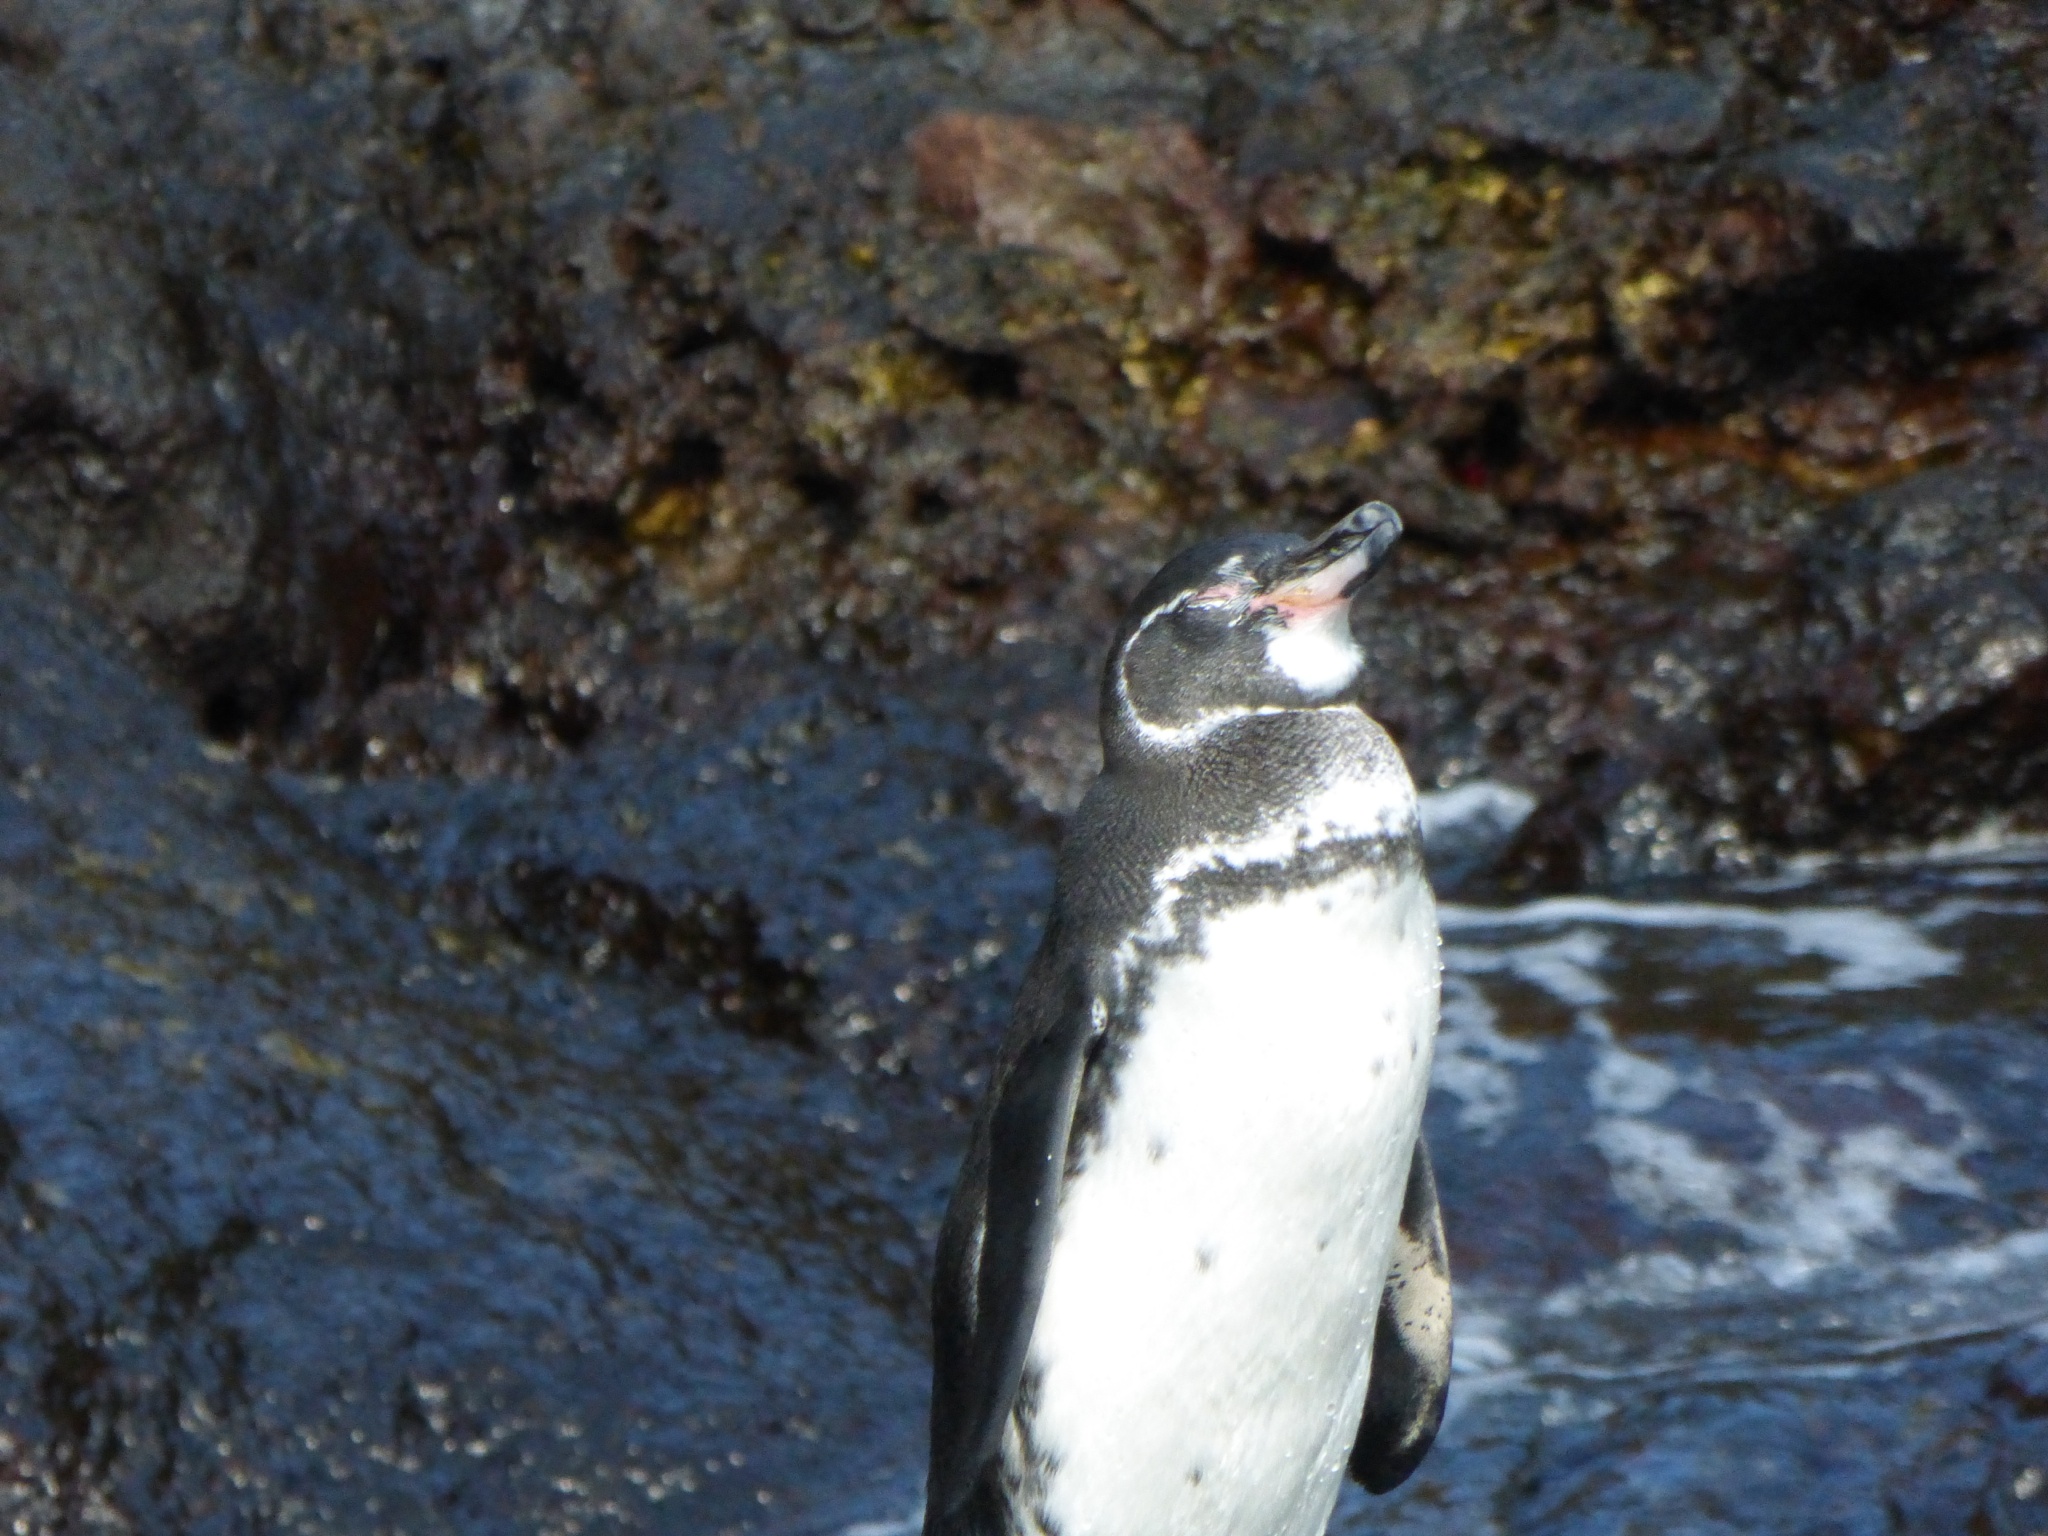 Our first Galapagos Penguin sighting.  This is a mature adult, enjoying the sun as we all scrambled like crazy in the pangas to take pictures.  My brother actually took this one.  